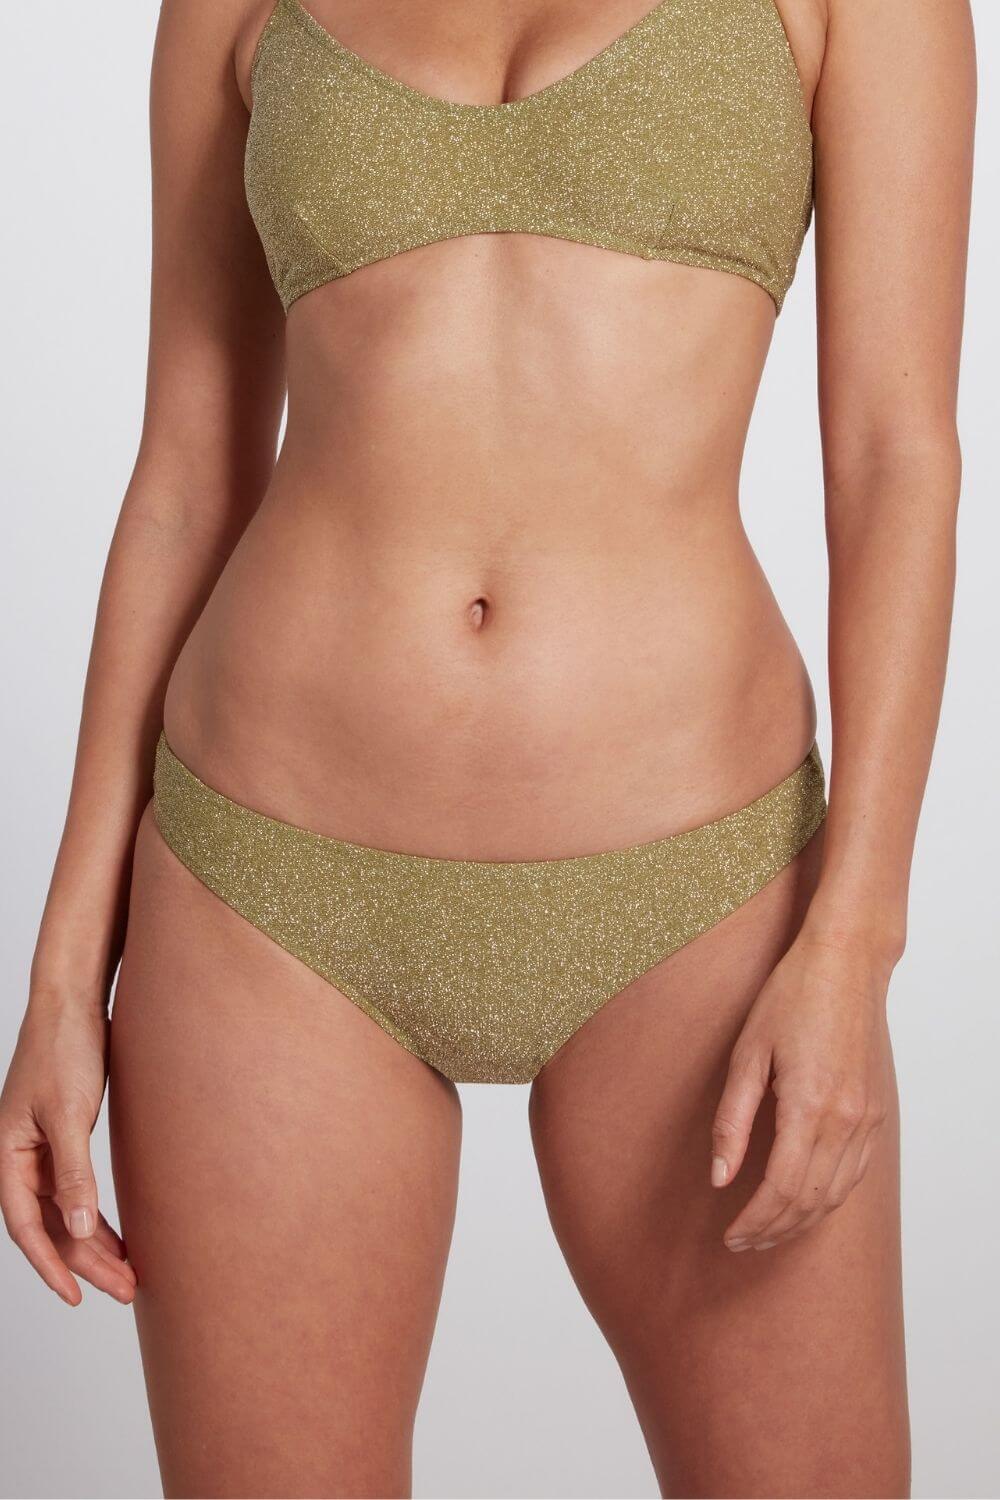 The Jenna low rise bikini bottom in lurex green is a classic brief with great coverage. 